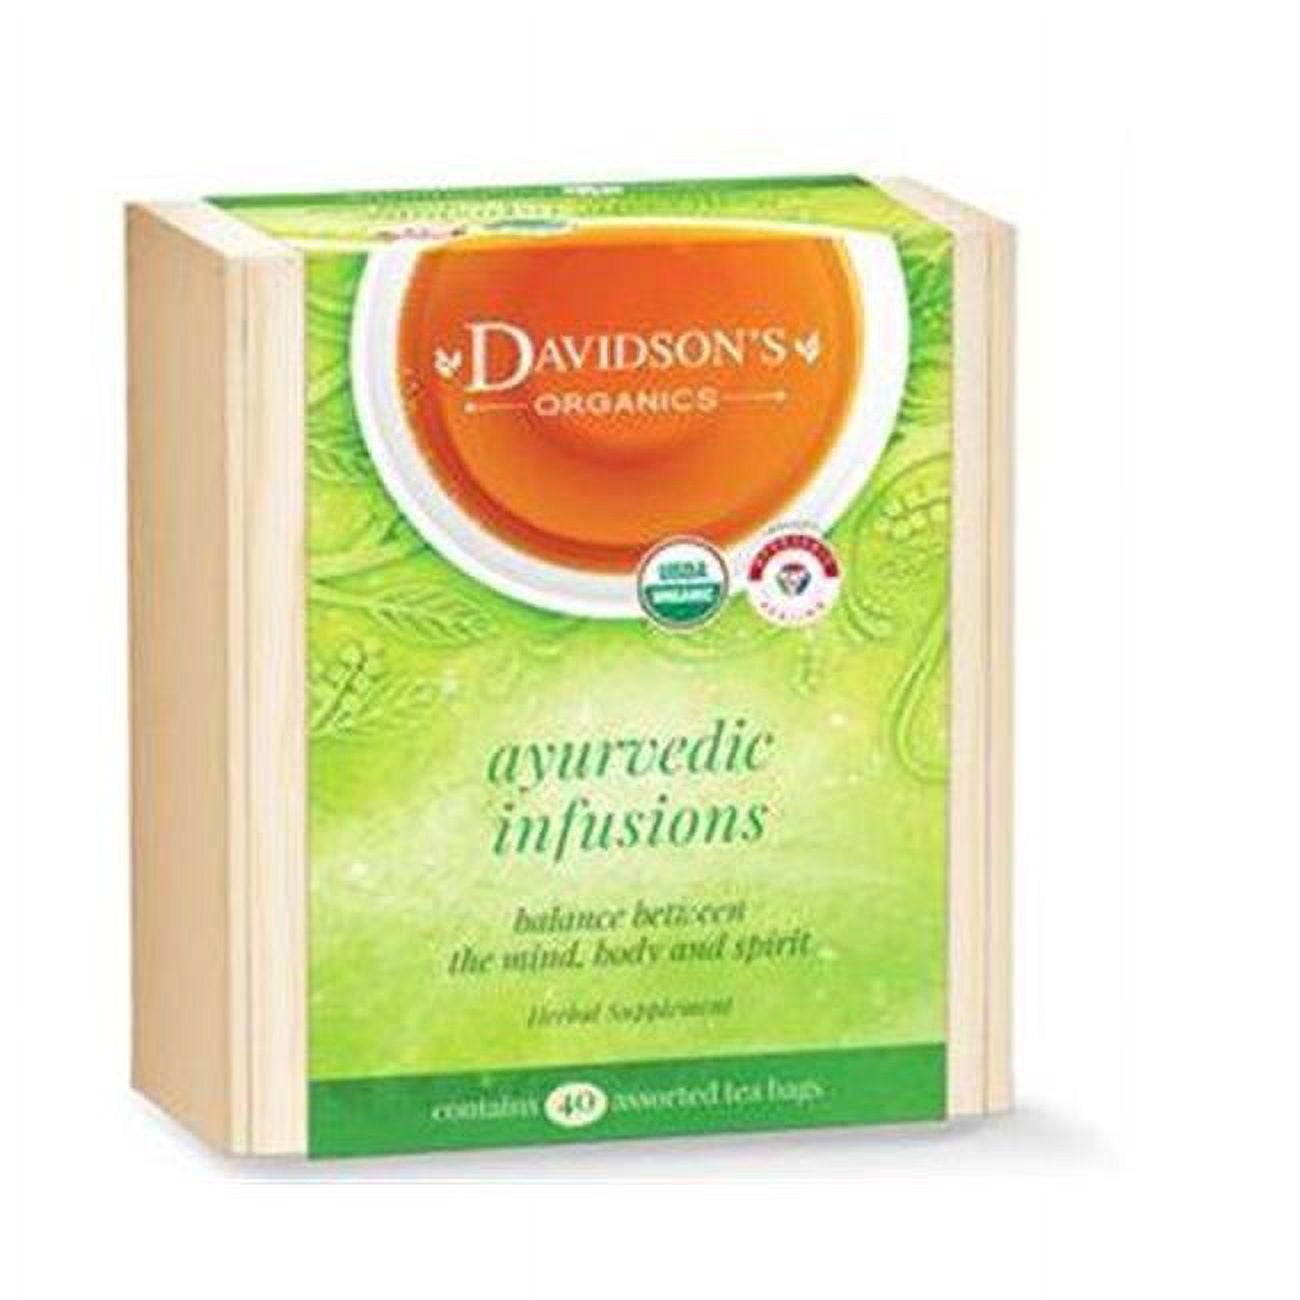 Picture of Davidsons Organics 694 Ayurvedic Infusions Collection Chest Tea - Pack of 6